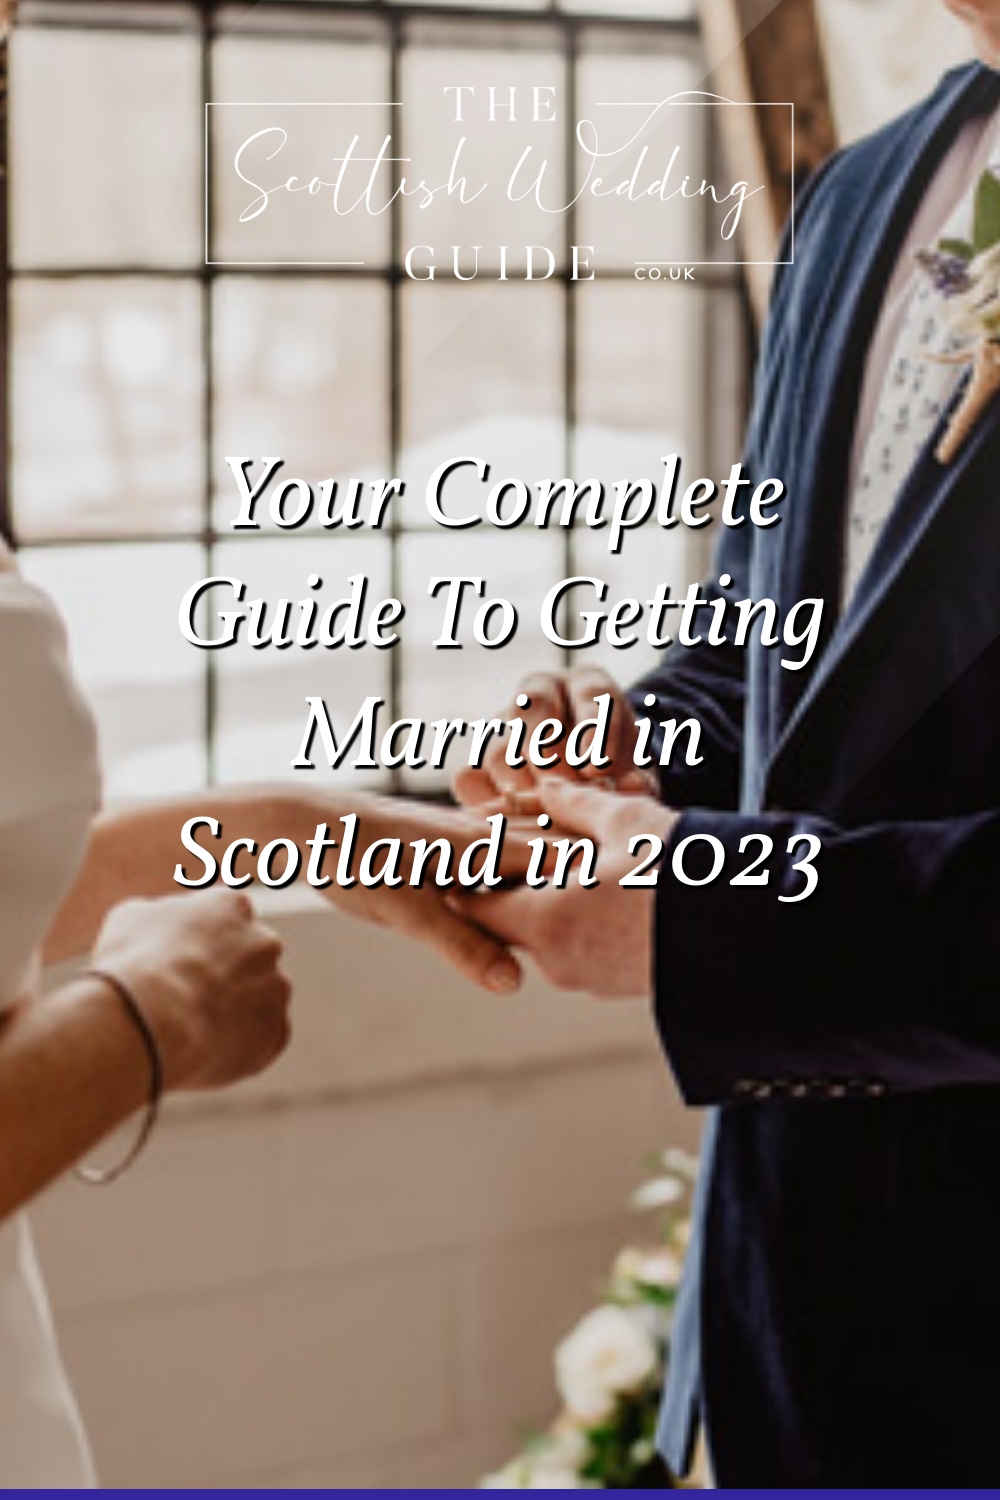 Your Complete Guide To Getting Married in Scotland in 2023